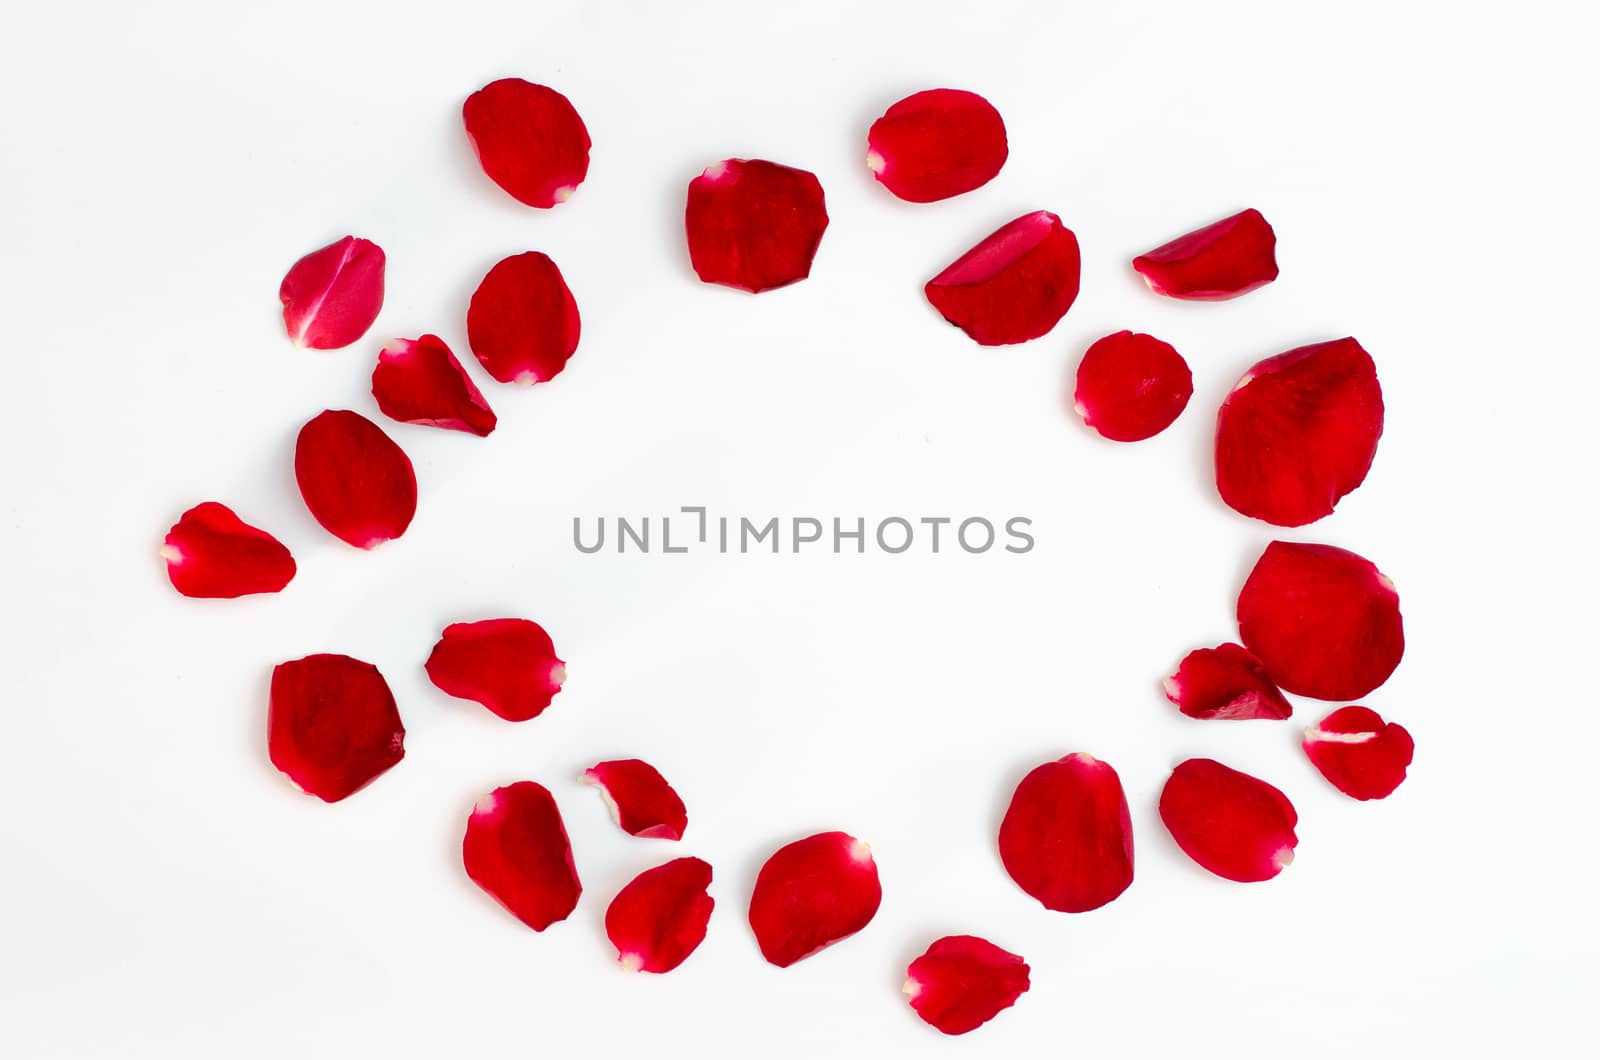 Rose petal isolate on a white background Red design heart by sarayut_thaneerat